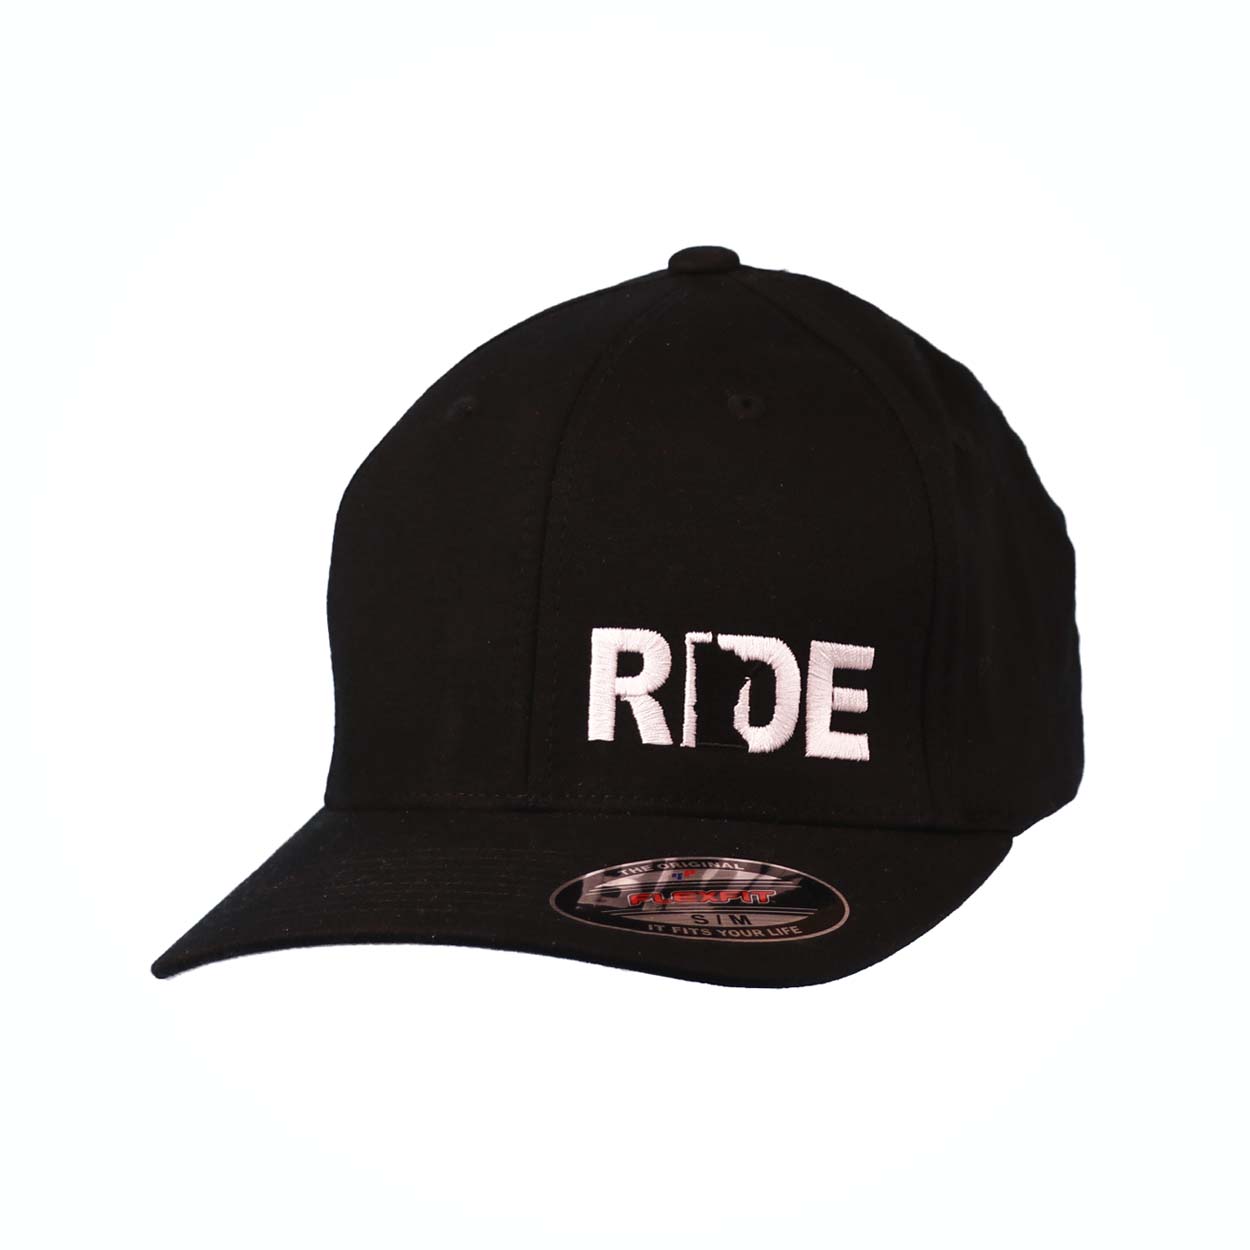 Ride Minnesota Night Out Embroidered Flex Fit Hat Black